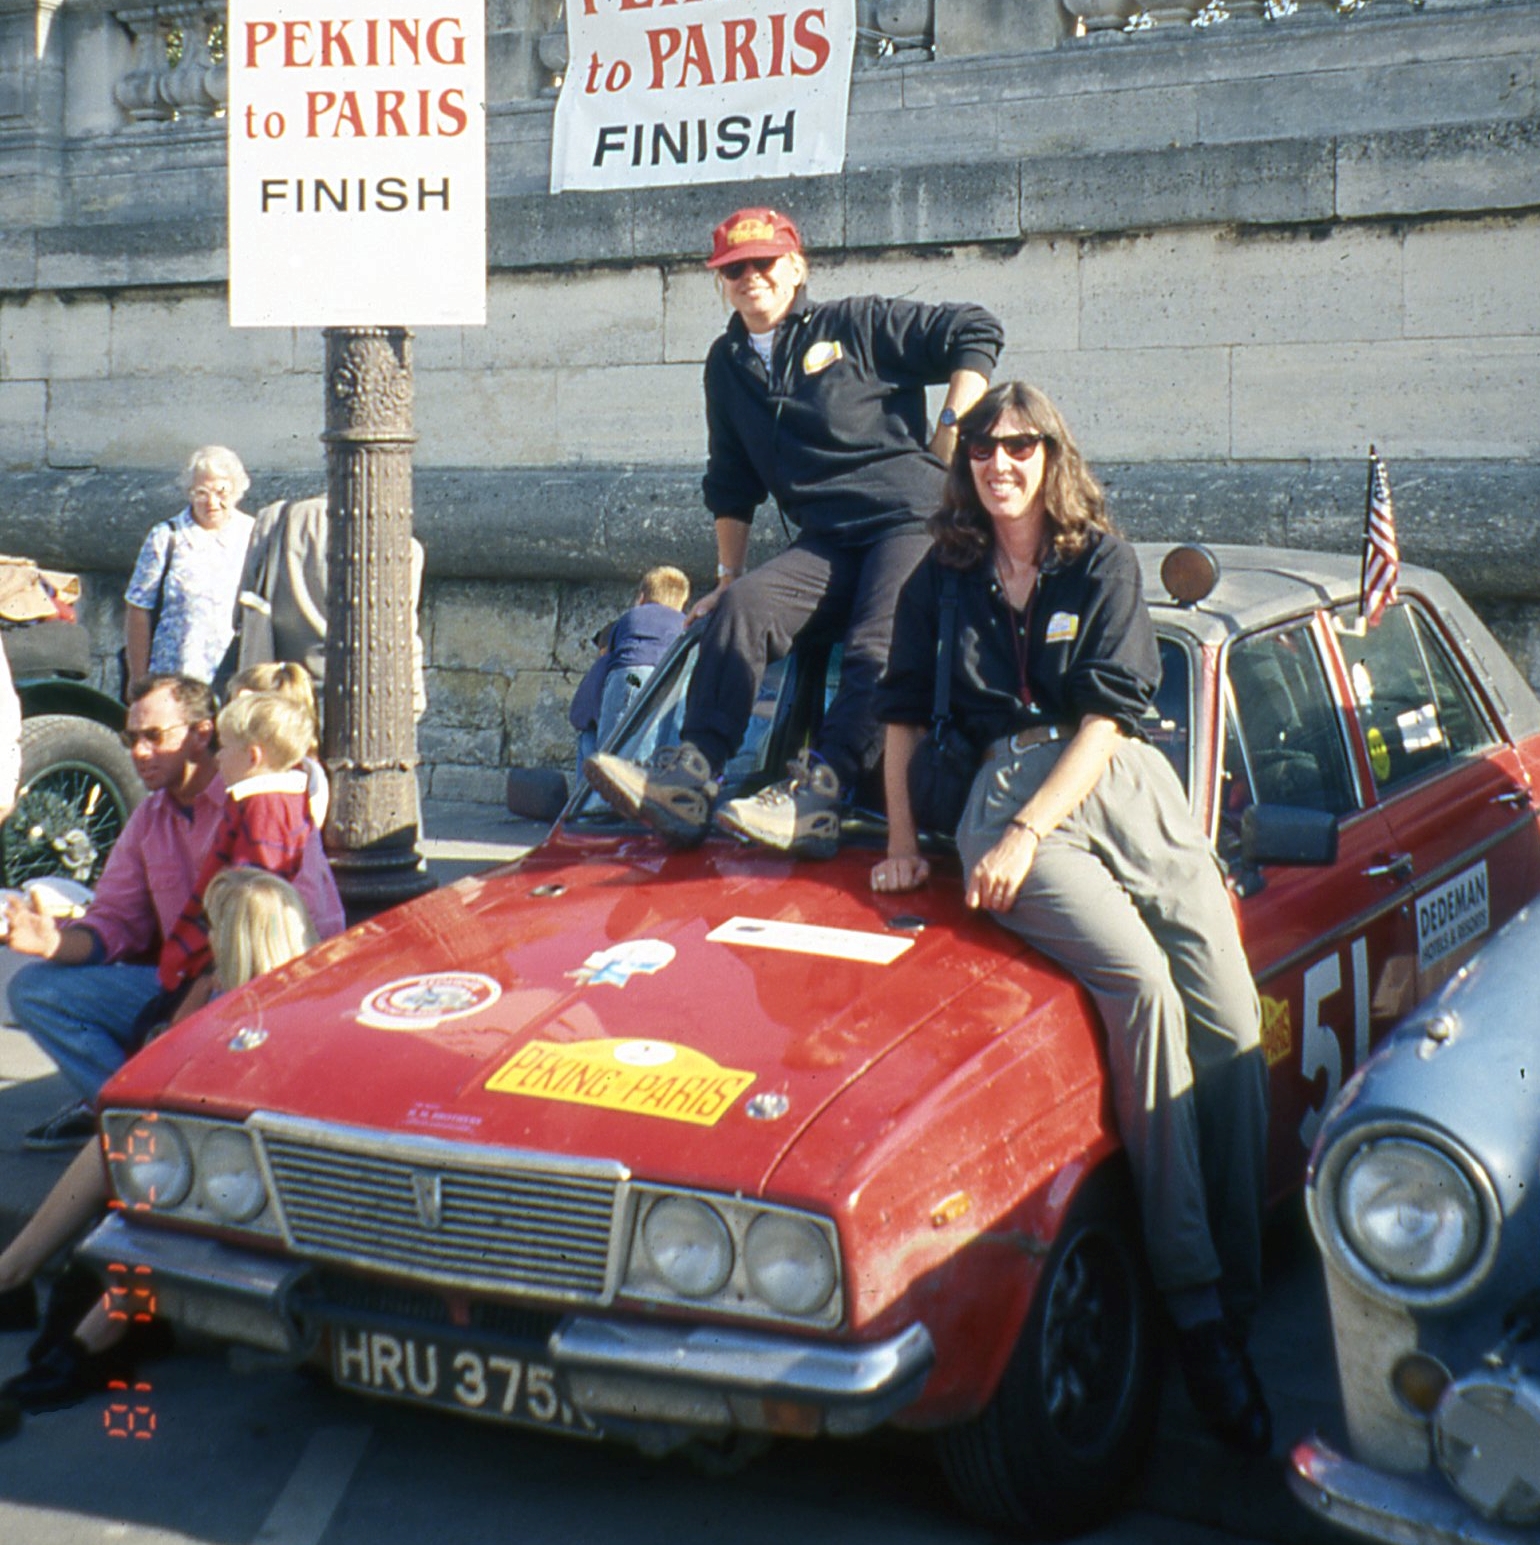 The female first-time car racing duo celebrating their wins at the finish line in Paris.